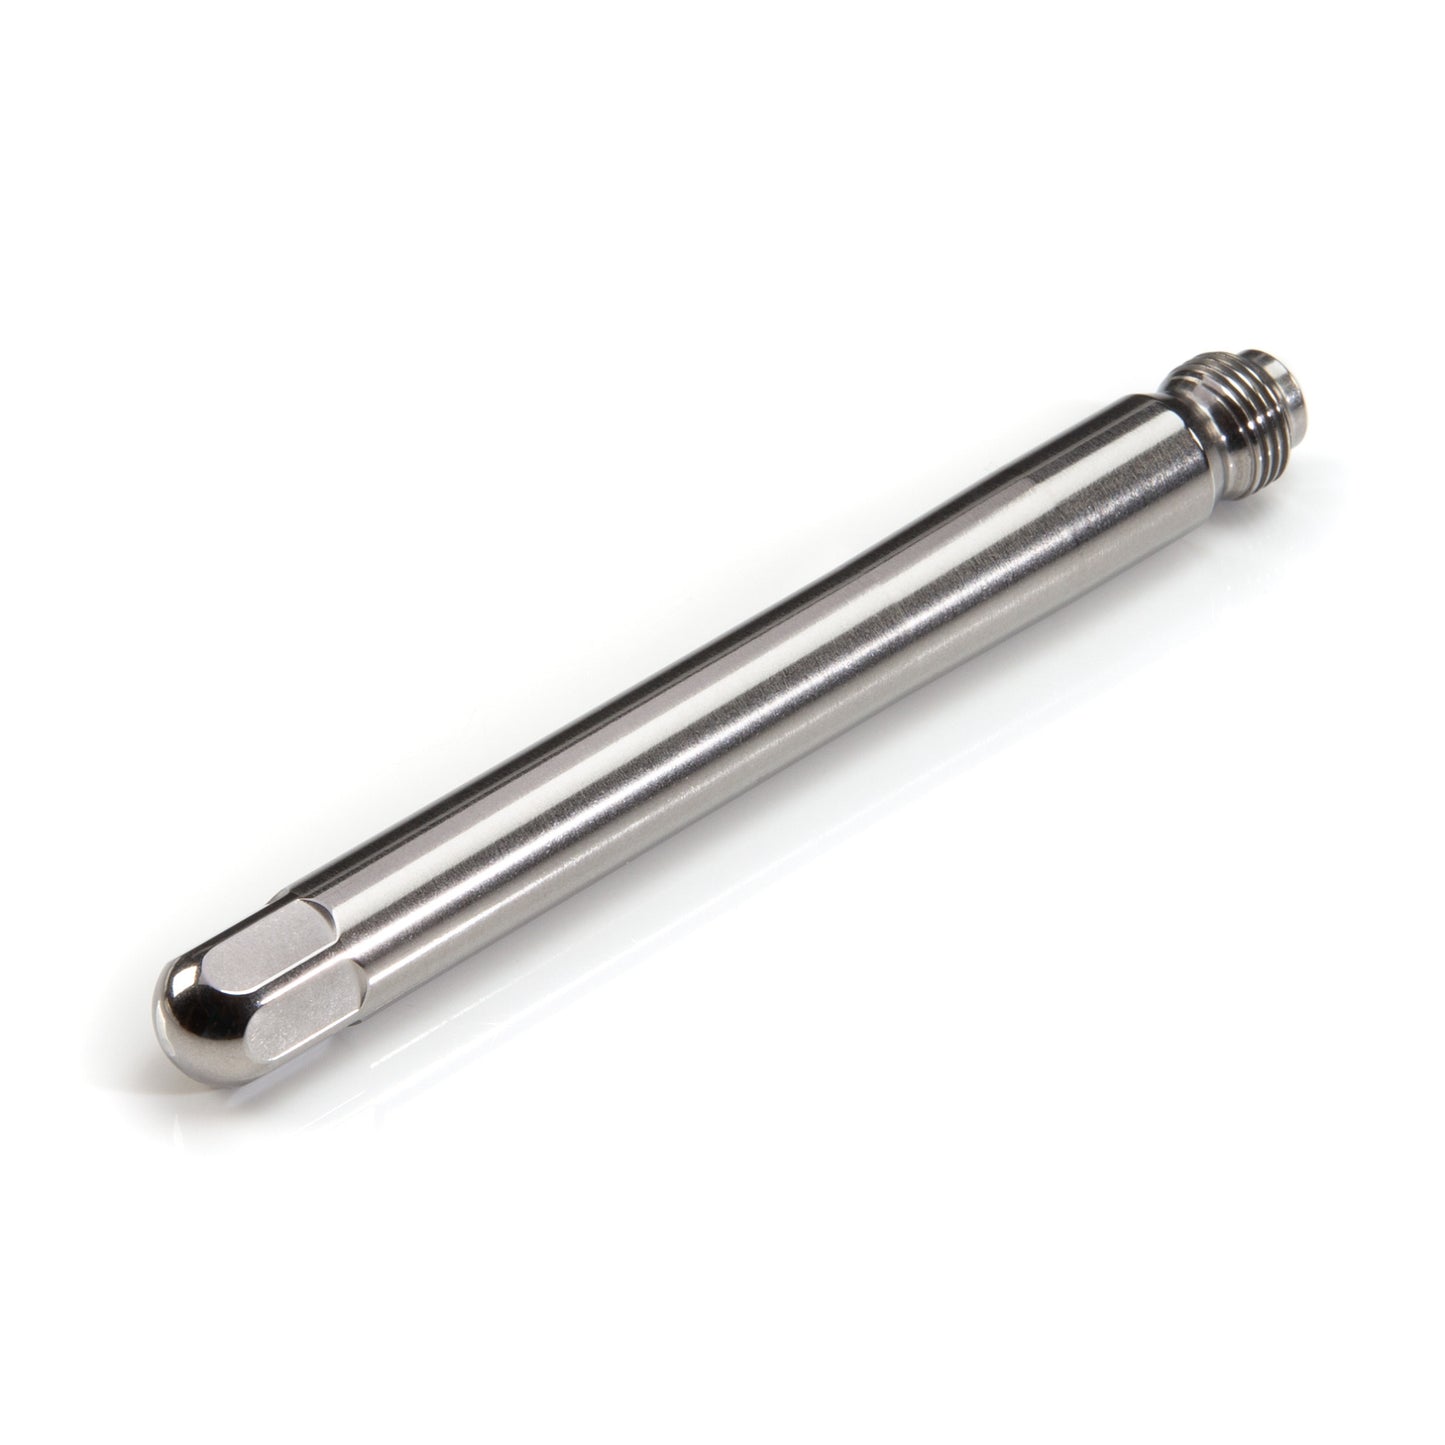 Stainless Steel M14 x 1.25 Hex End Wheel Hanger and Lug Guide Tool